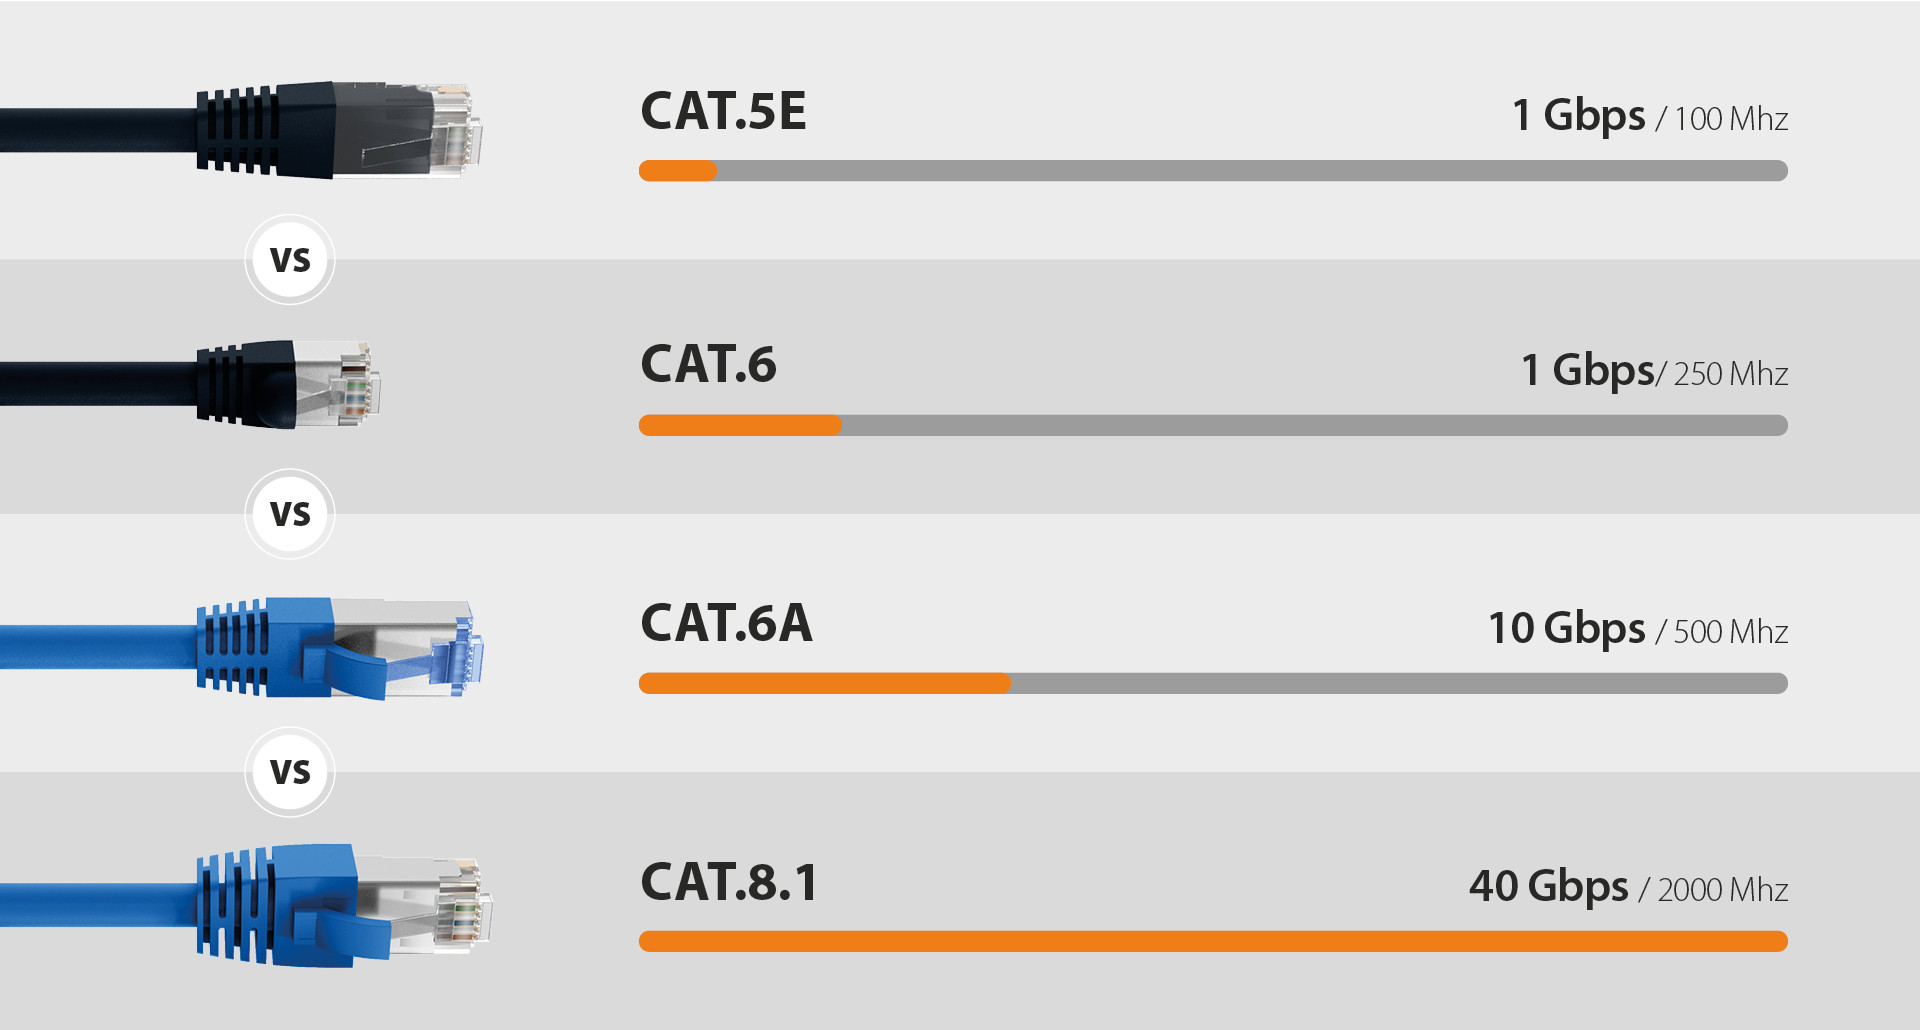 Comparison of the network cable categories CAT.5E, CAT.6, CAT.6A and CAT.8.1 with their transmission speeds and frequencies.